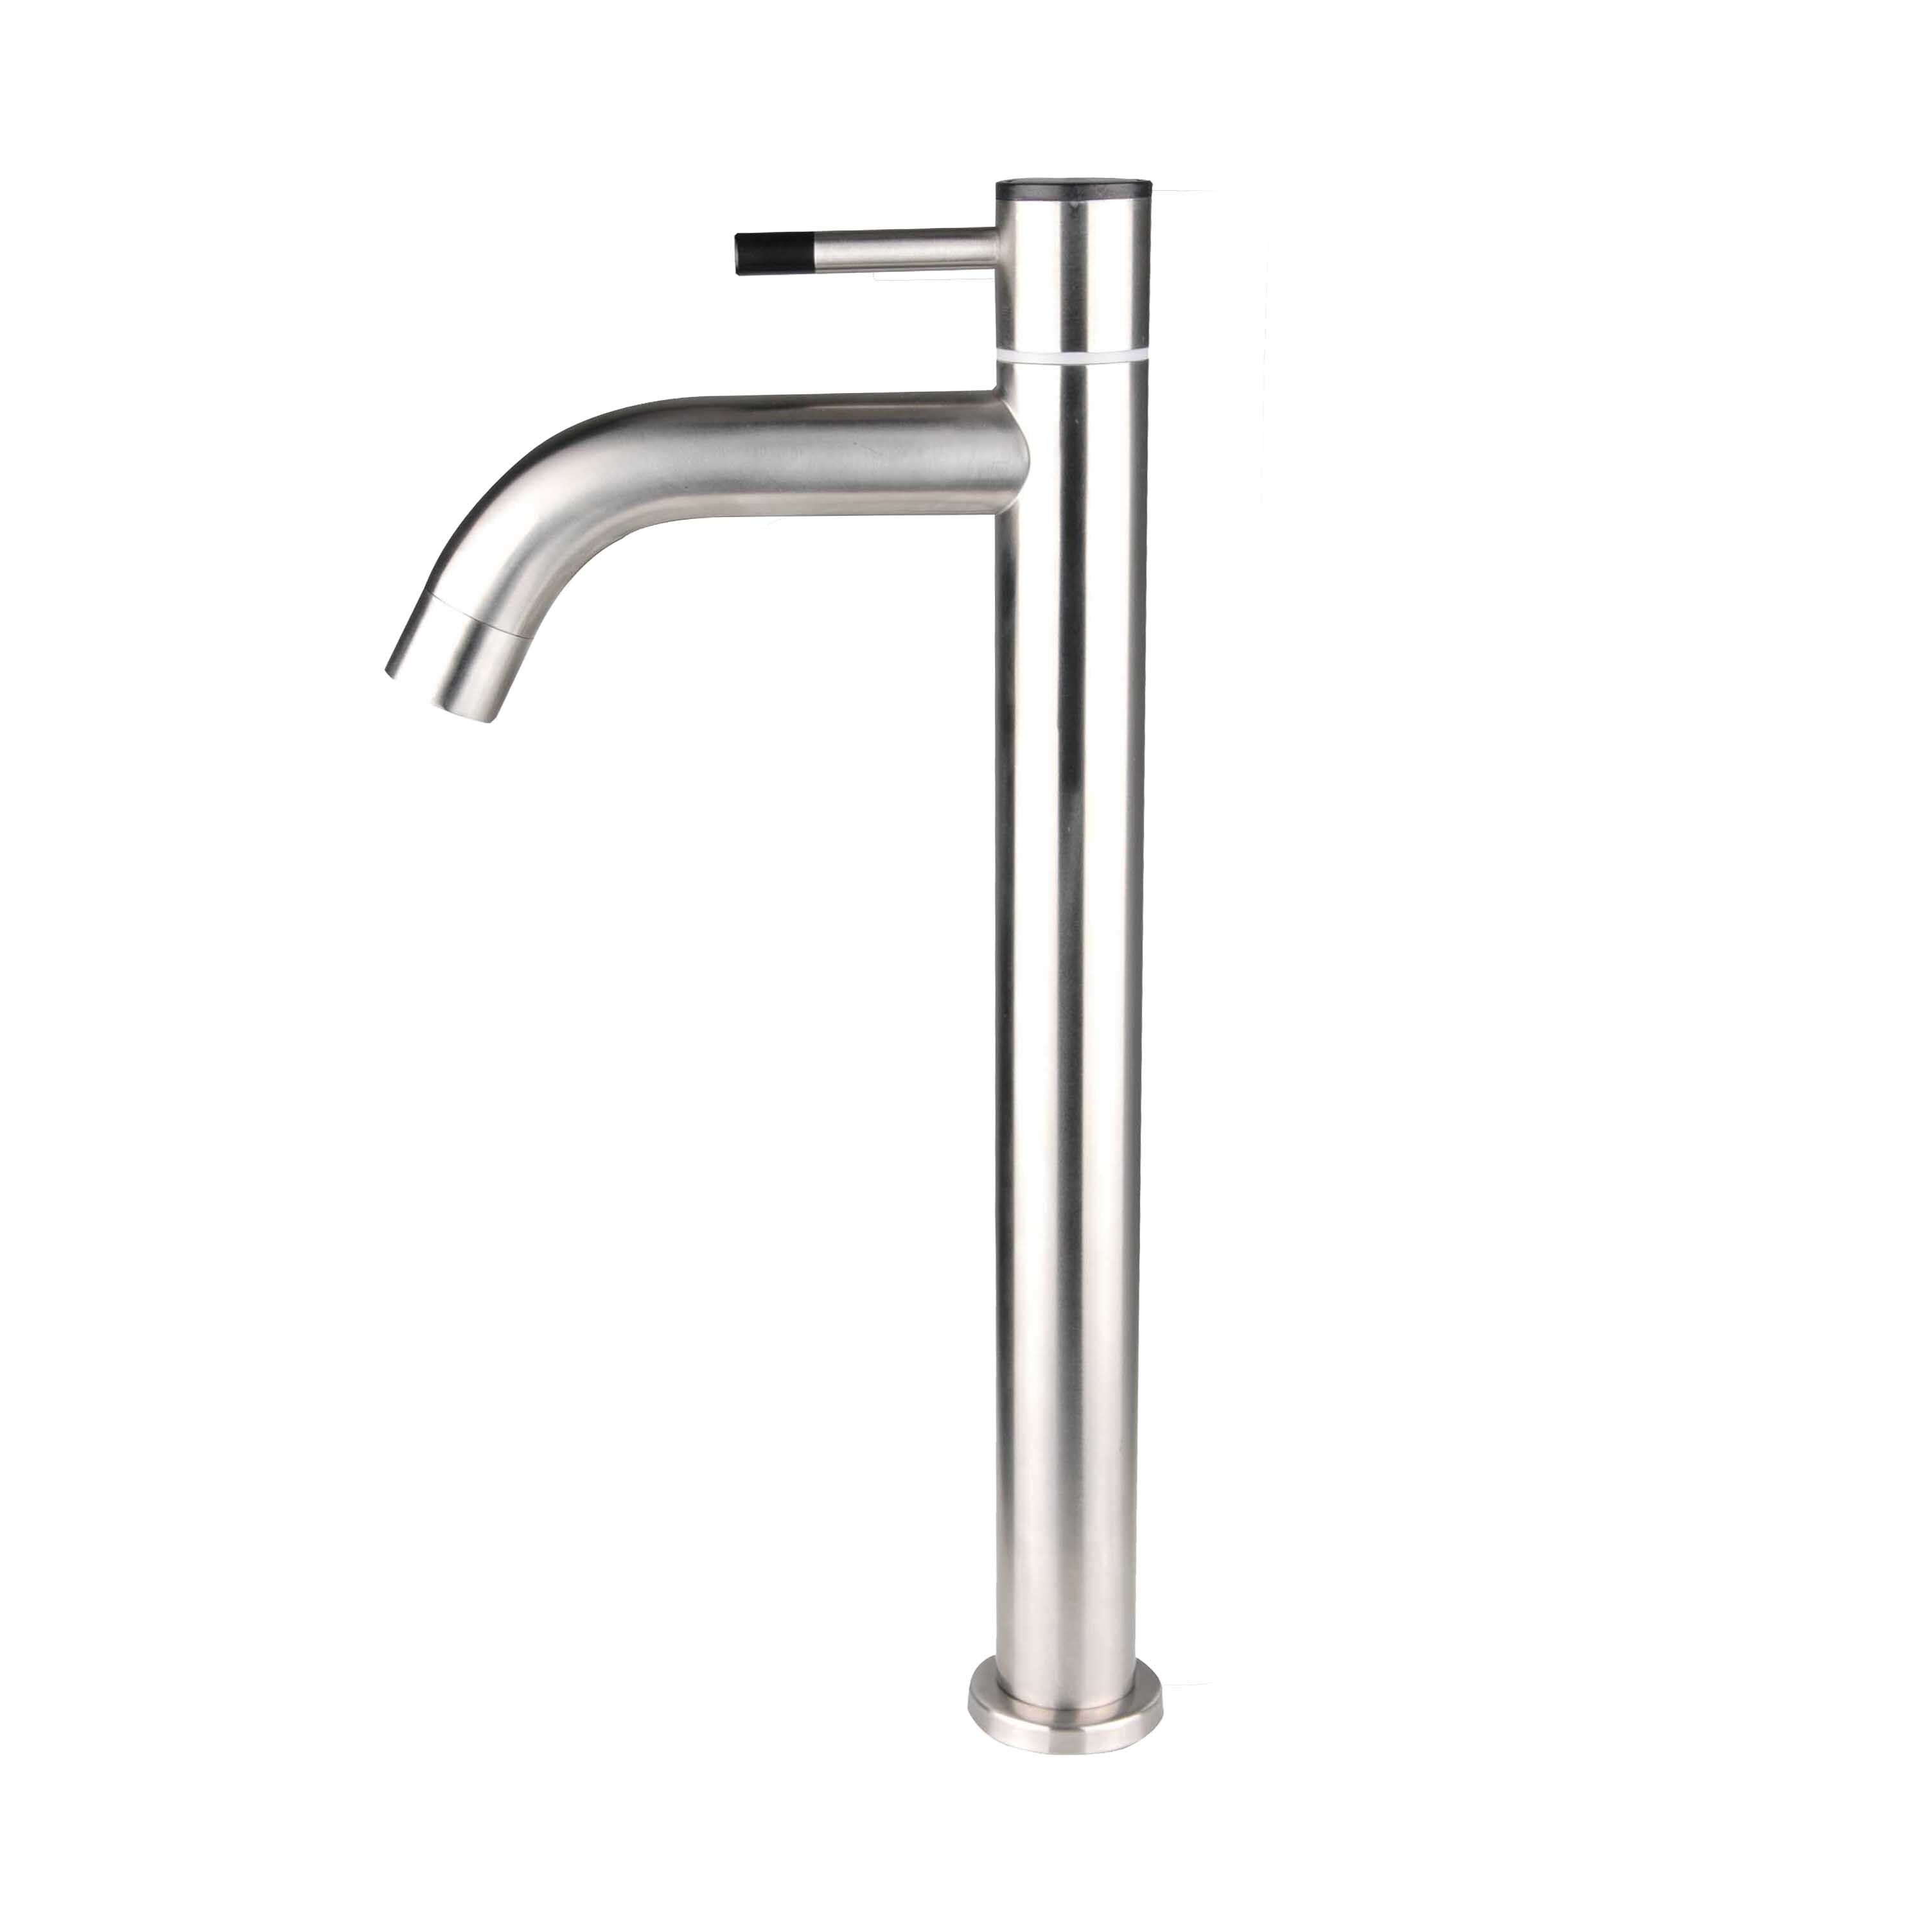 304 Stainless Steel Kitchen Faucet,Kitchen Faucet Manufacturers,Bathroom Faucet Manufacturers,Kitchen Faucet China Factory,high end kitchen faucet manufacturers